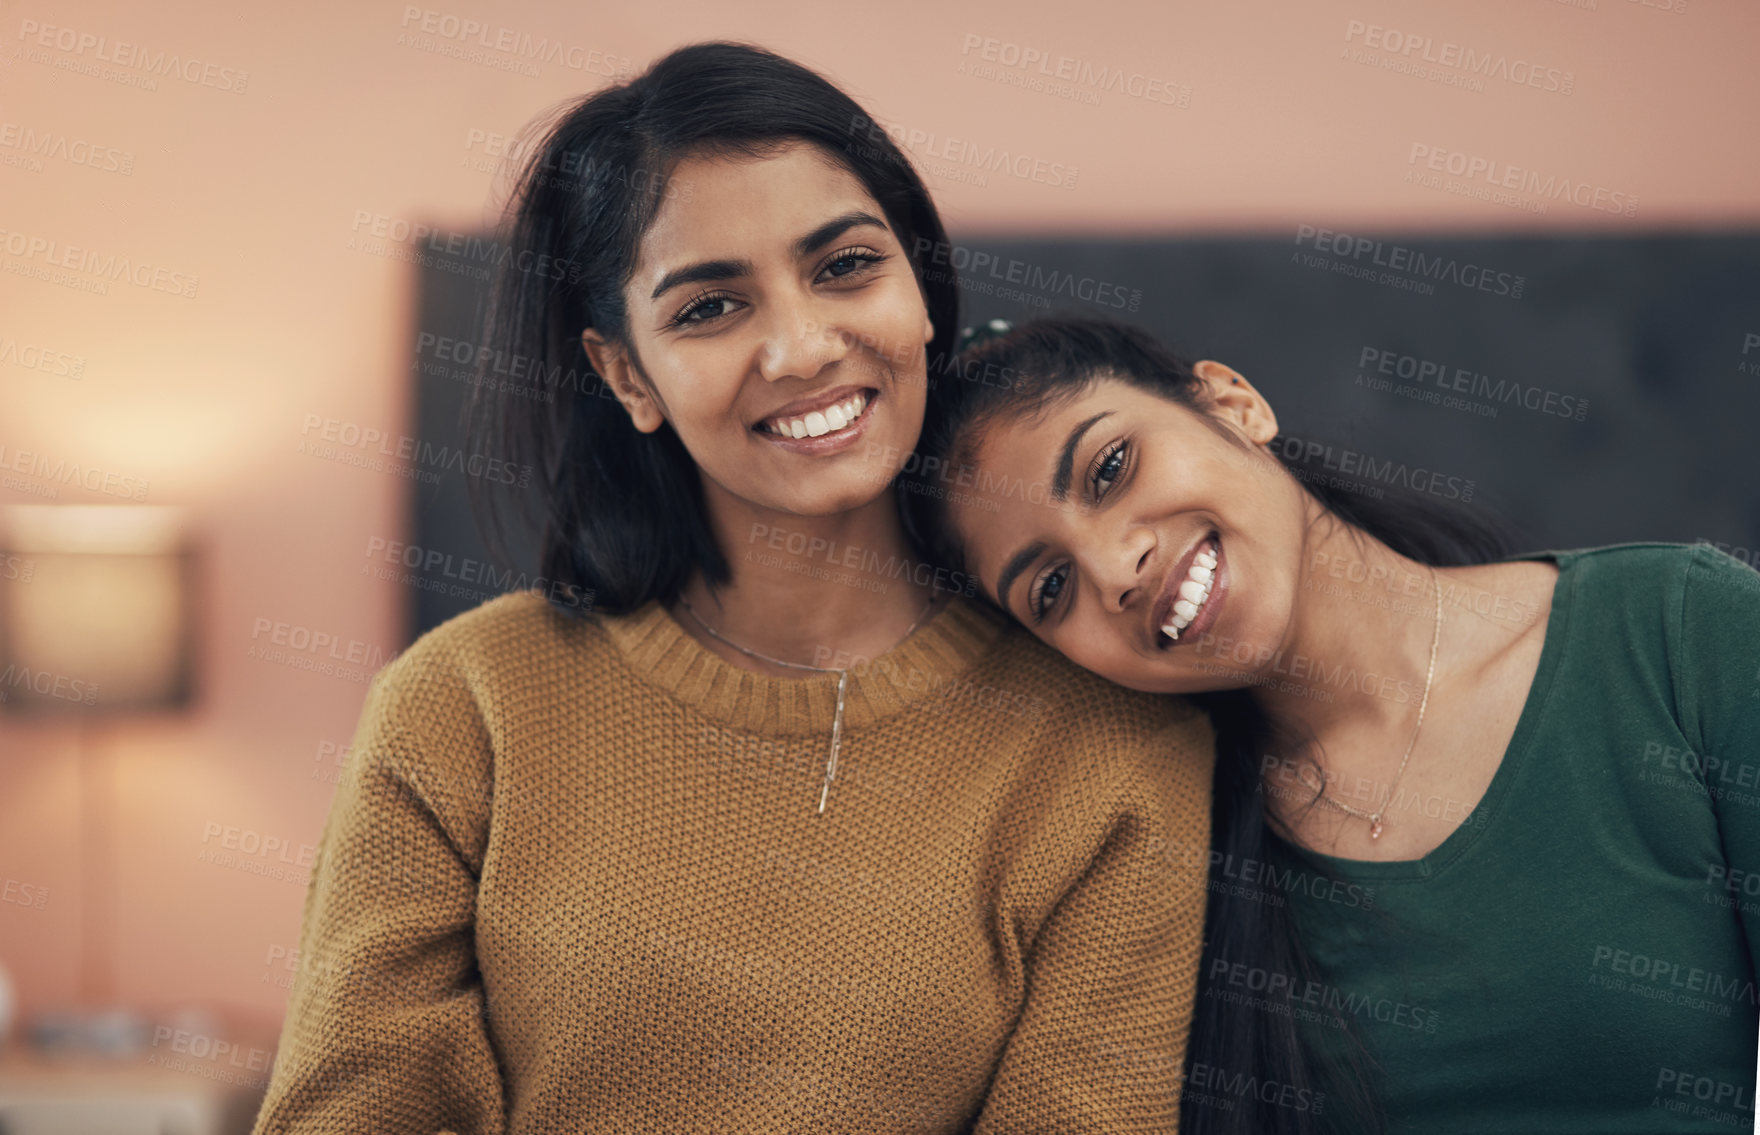 Buy stock photo Shot of two happy young women sitting together at home